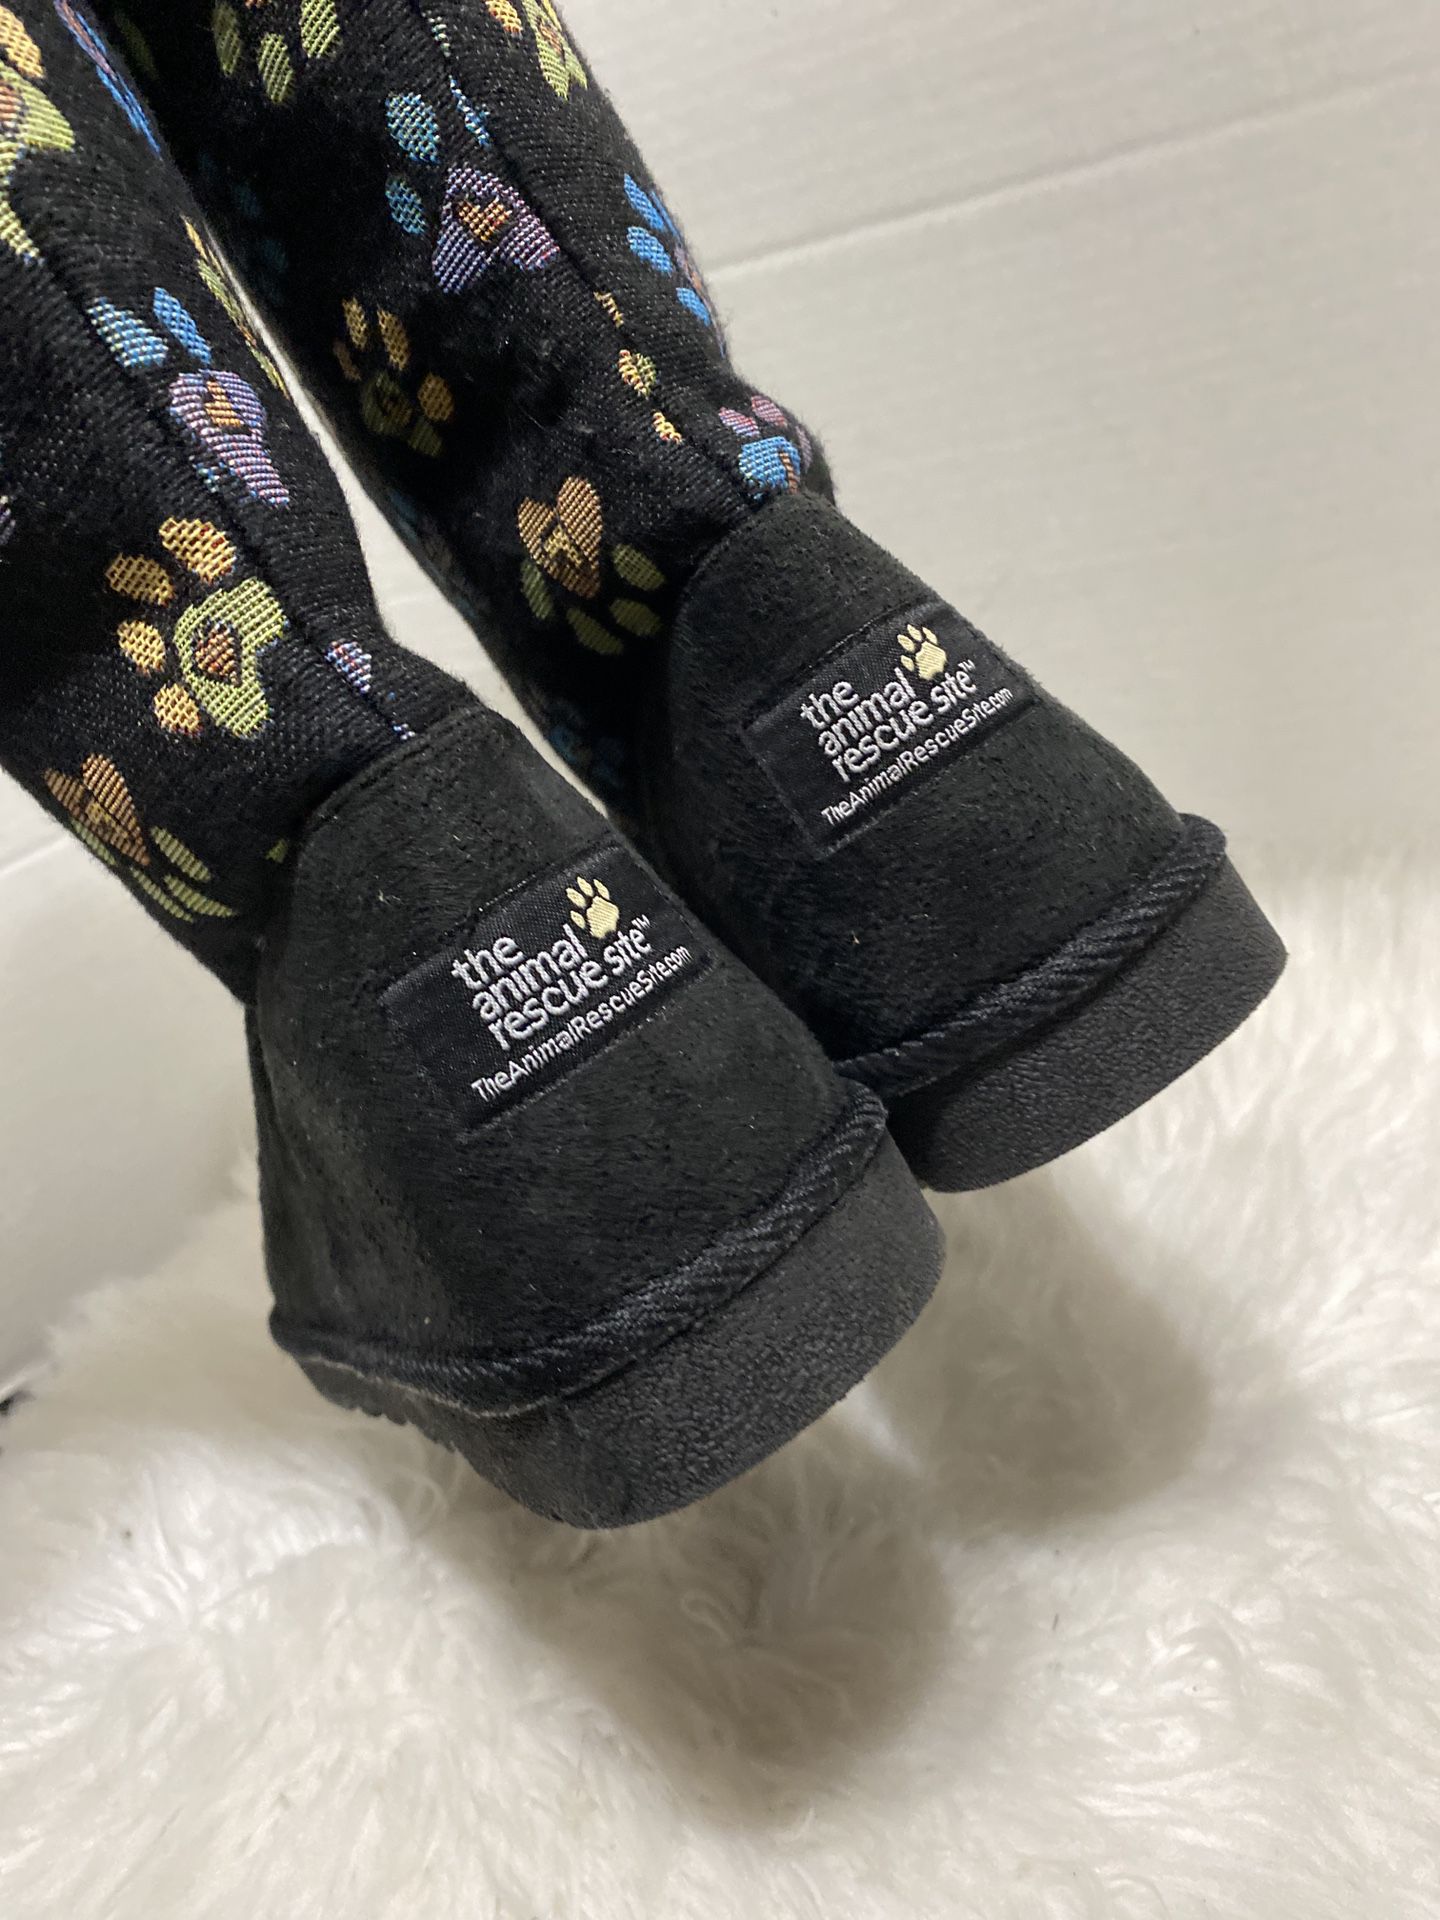 NWB Women’s The Animal Rescue Site Faux Fur Lined Paw Print Boots Size 8 Black